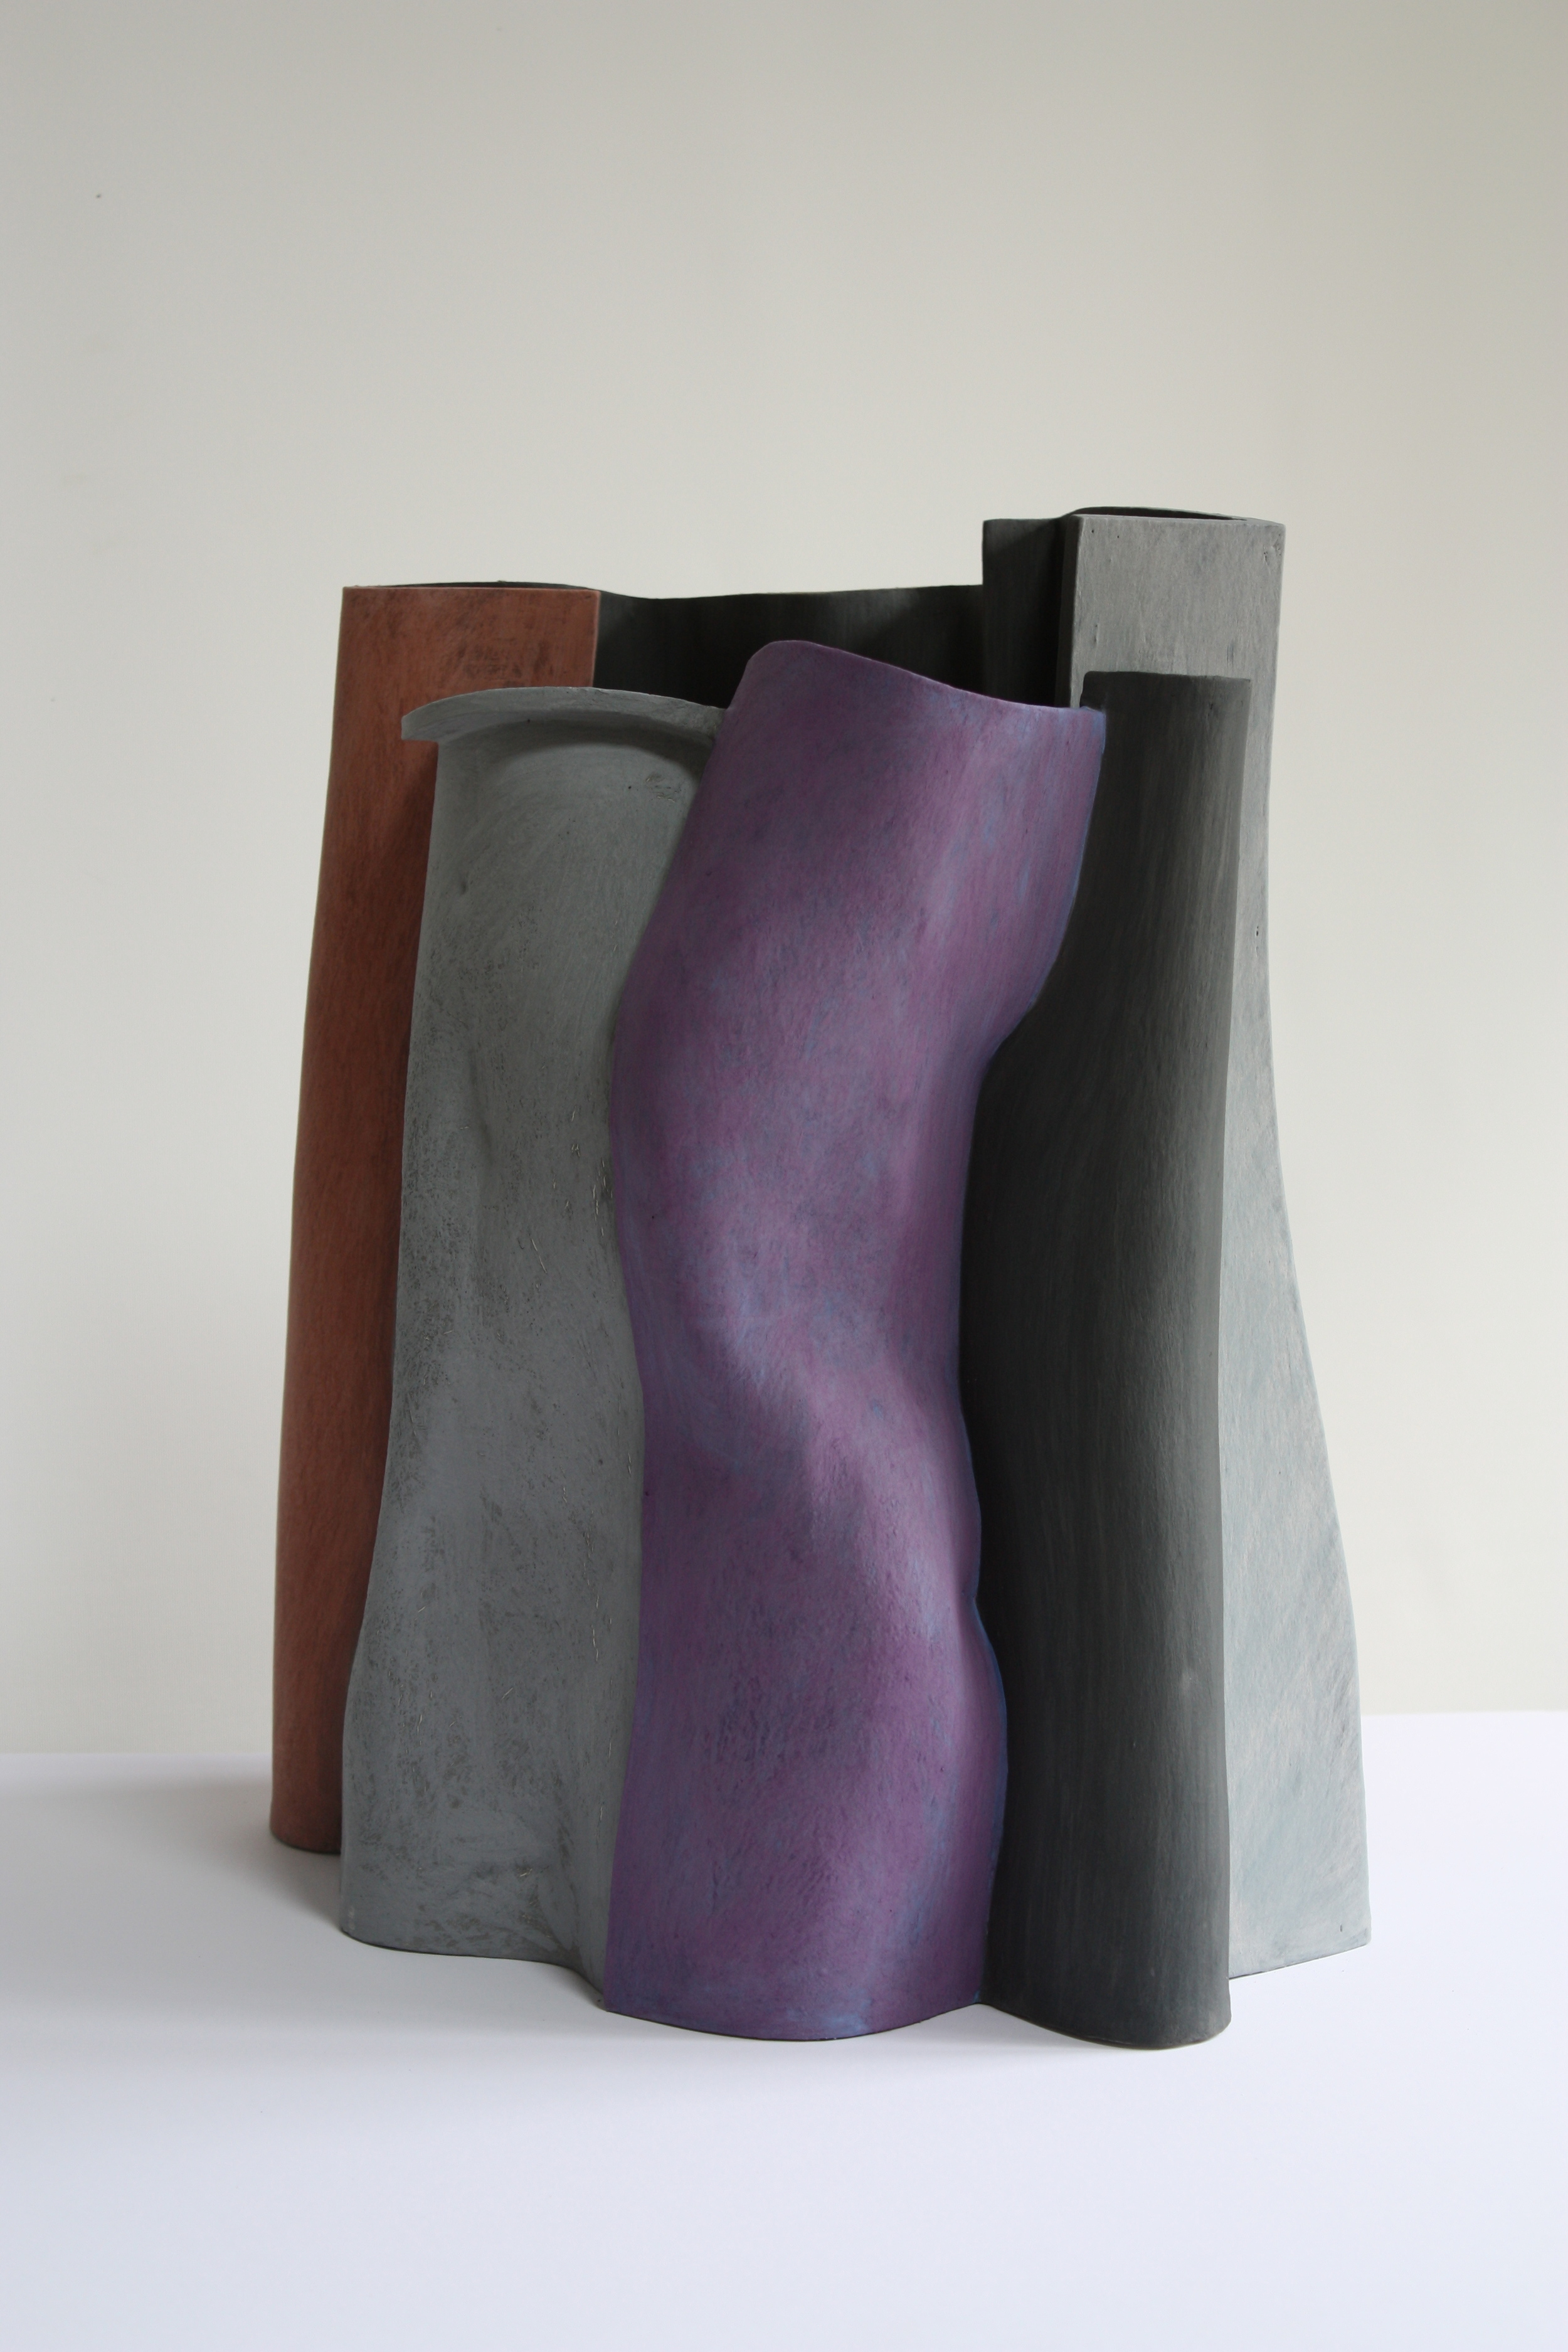 Give it time, 2012, 46cm high